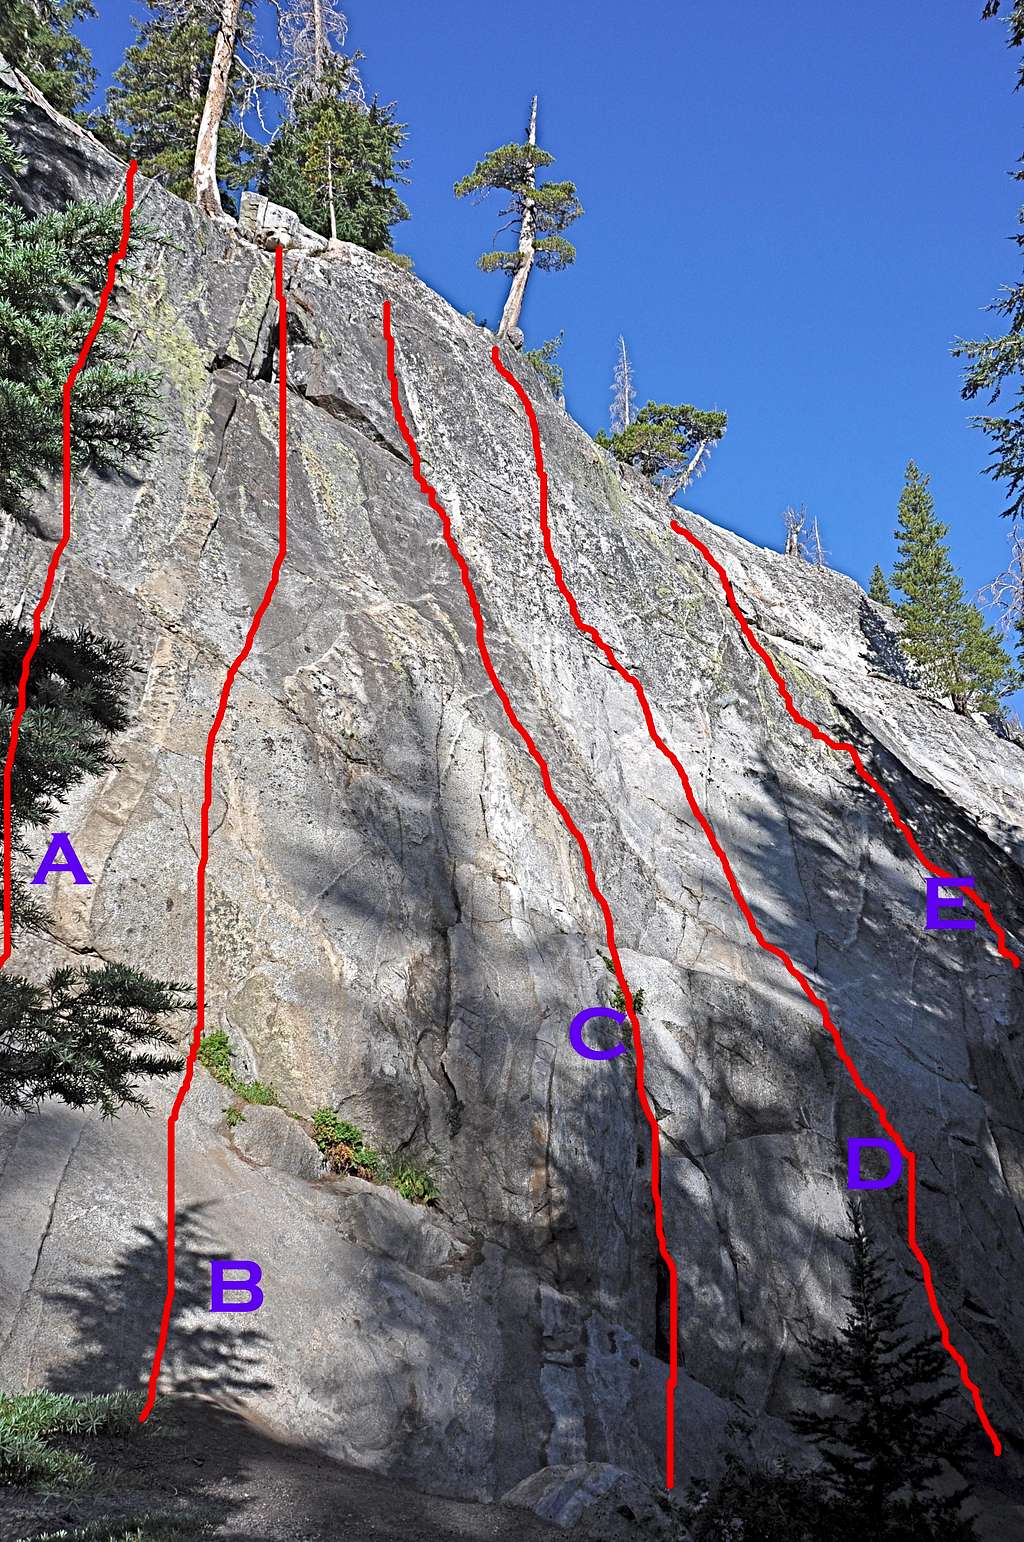 Routes of the left slab